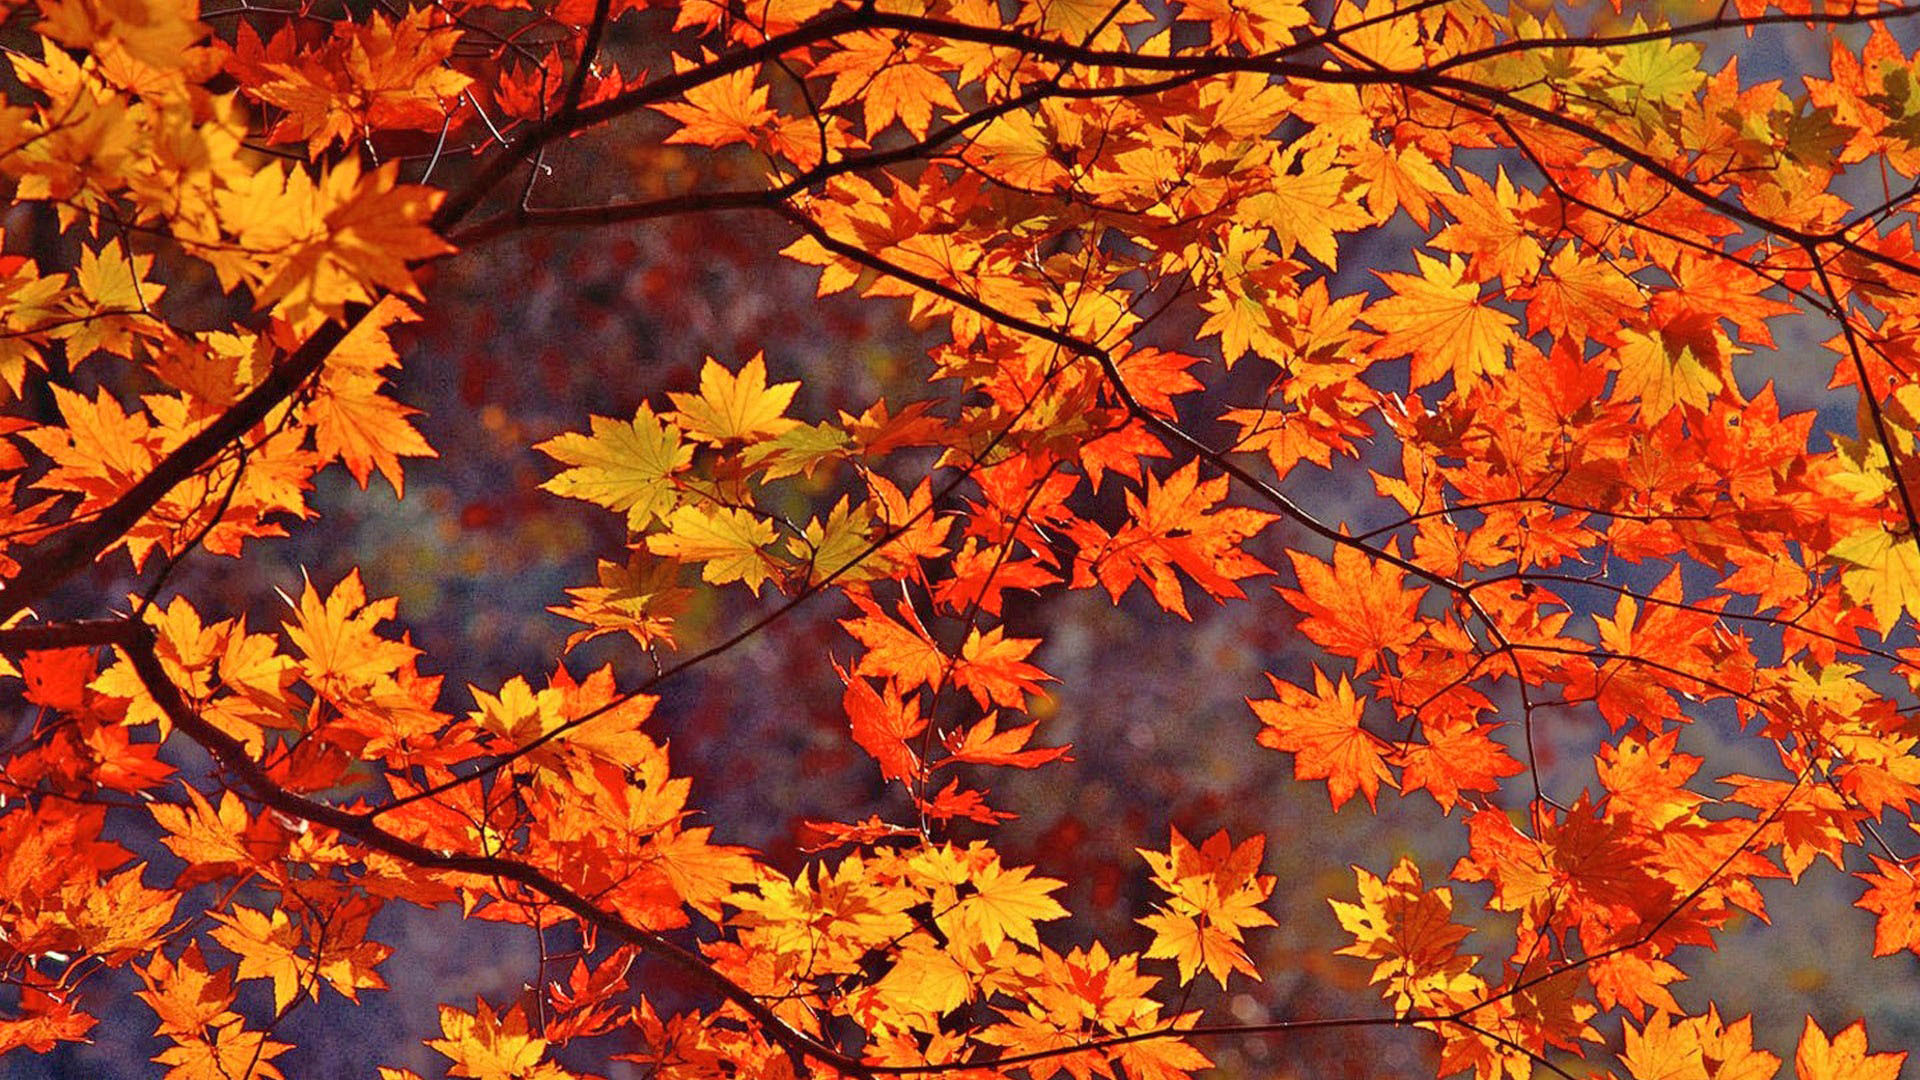 1920x1080 ... Fall Leaves Wallpaper Backgrounds